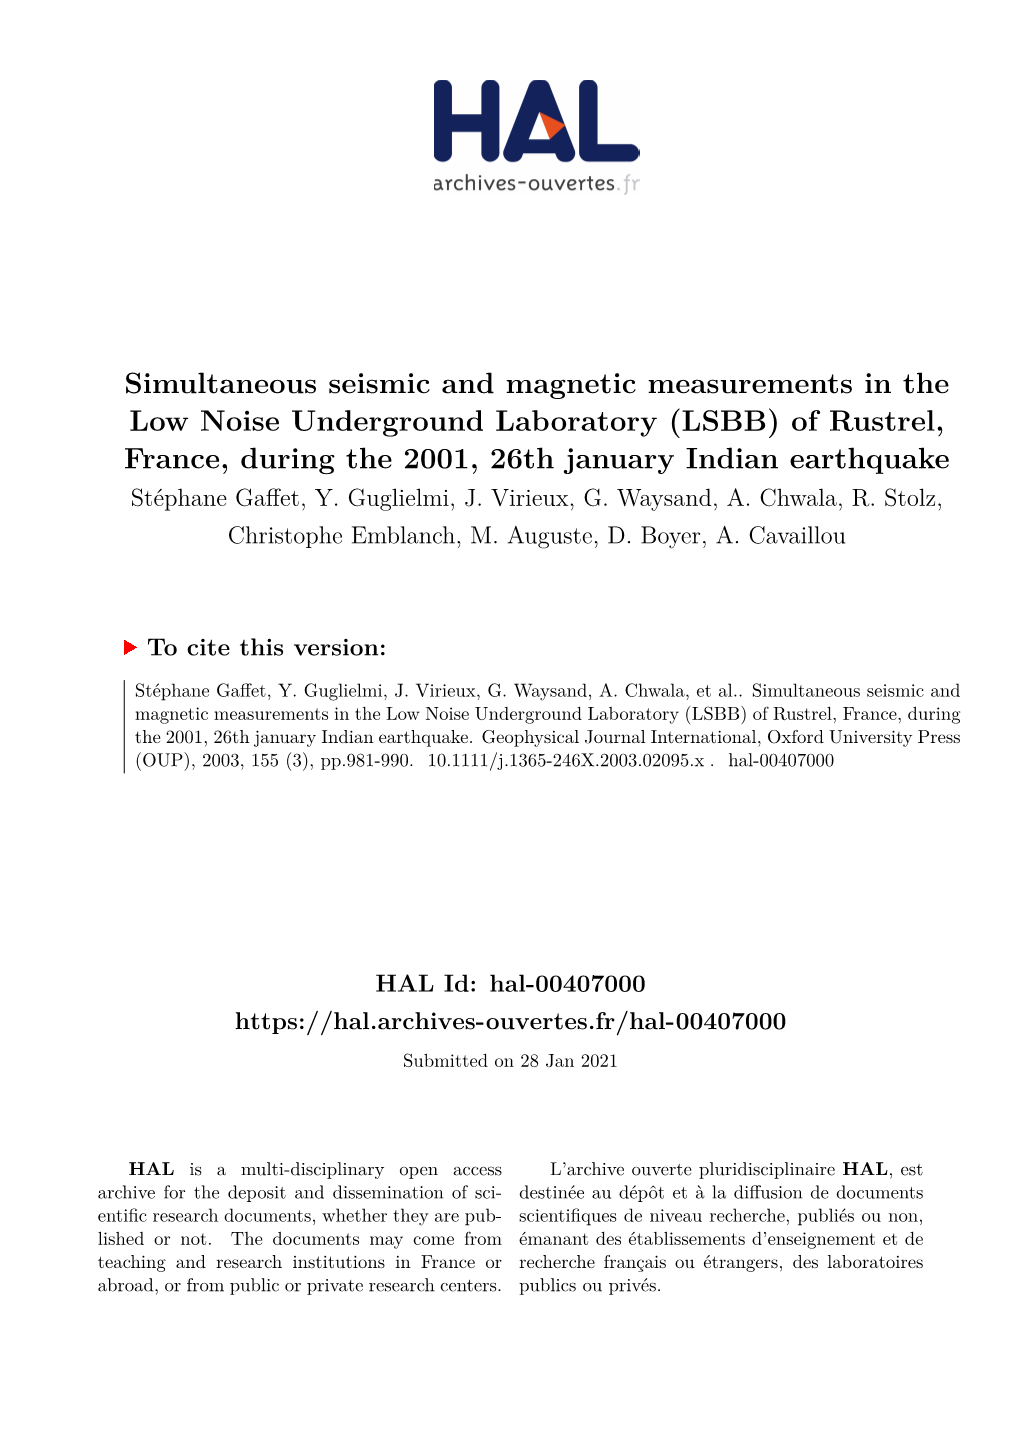 Simultaneous Seismic and Magnetic Measurements in the Low Noise